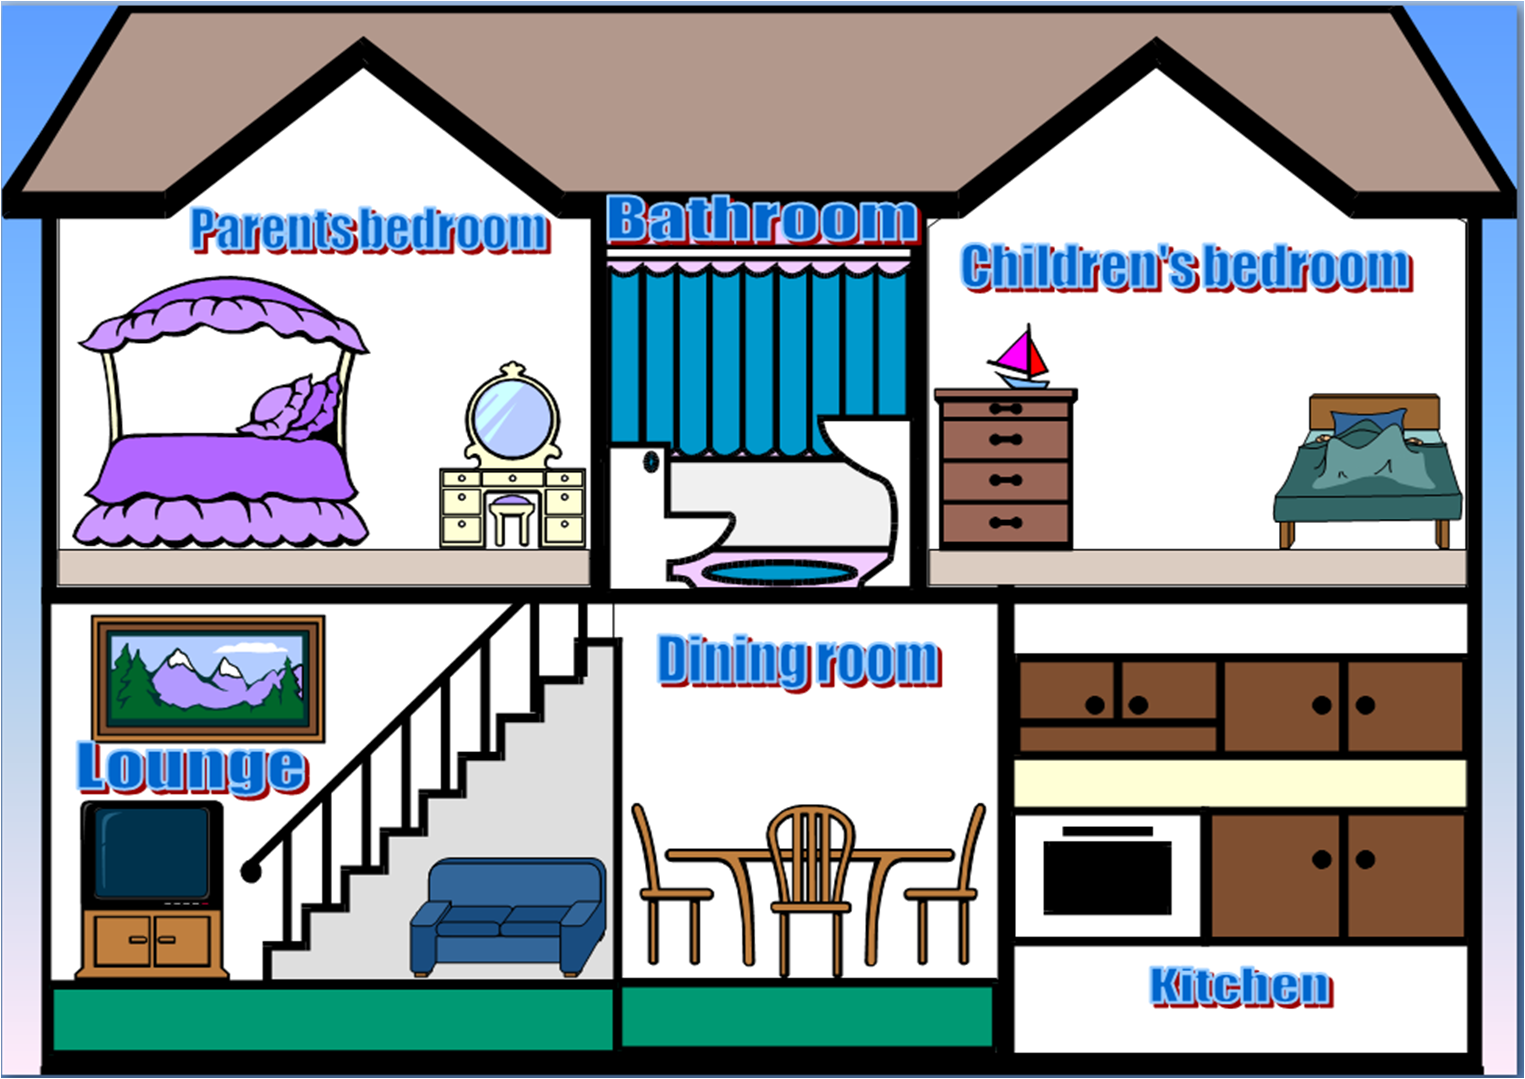 House Rooms for Kids. Rooms in the House for Kids. Parts of the House for Kids. Rooms in the House pictures.